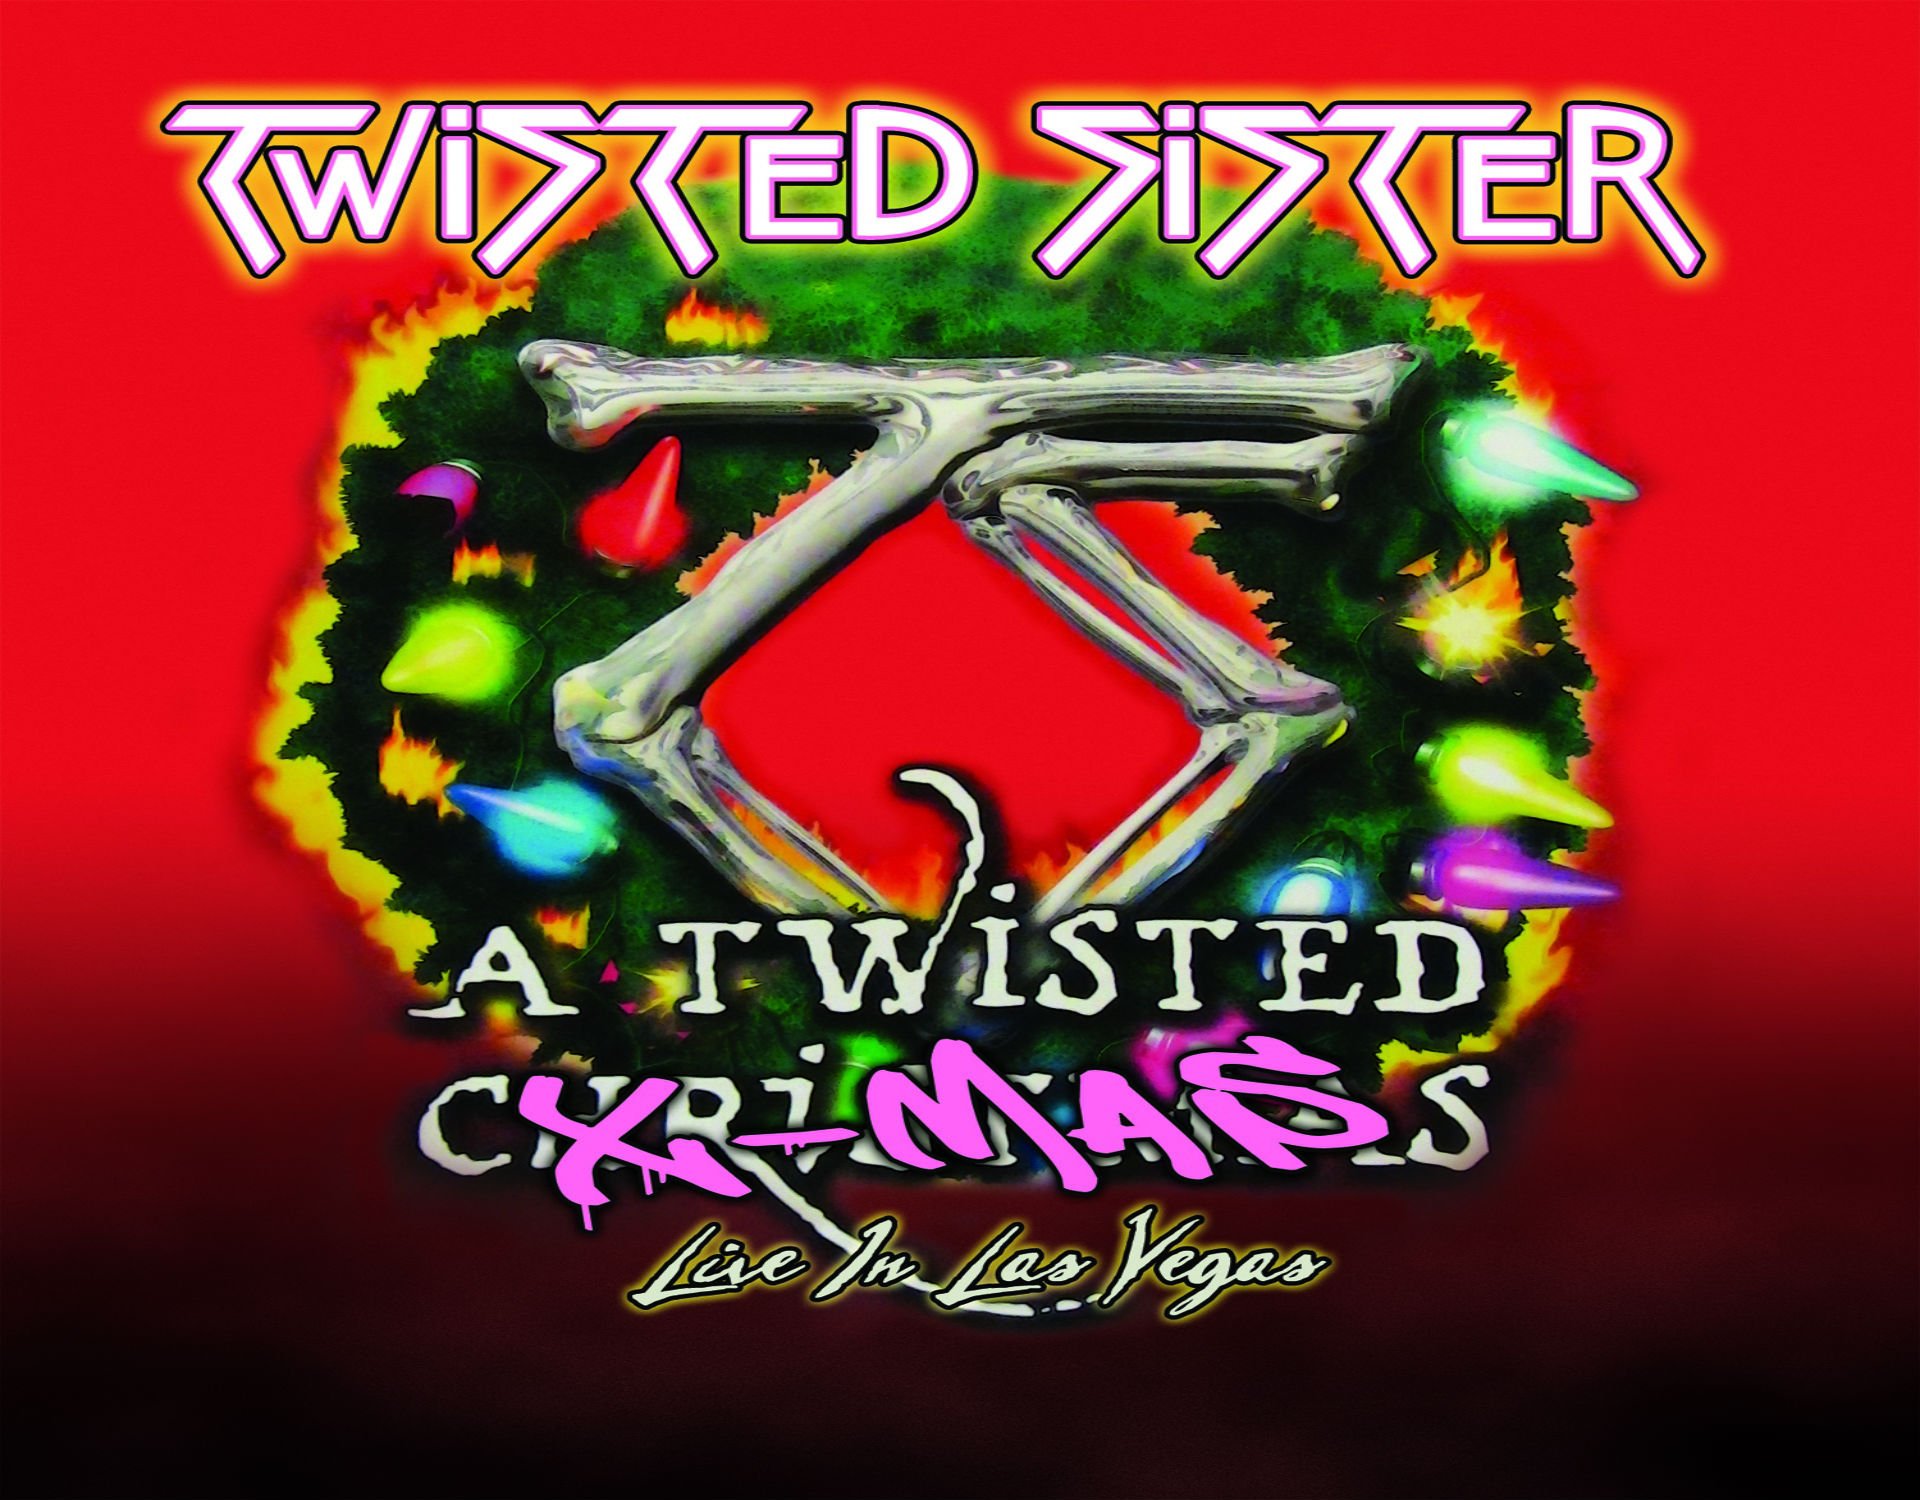 heavy, Metal, Christmas, Holiday, Twisted, Sister Wallpaper